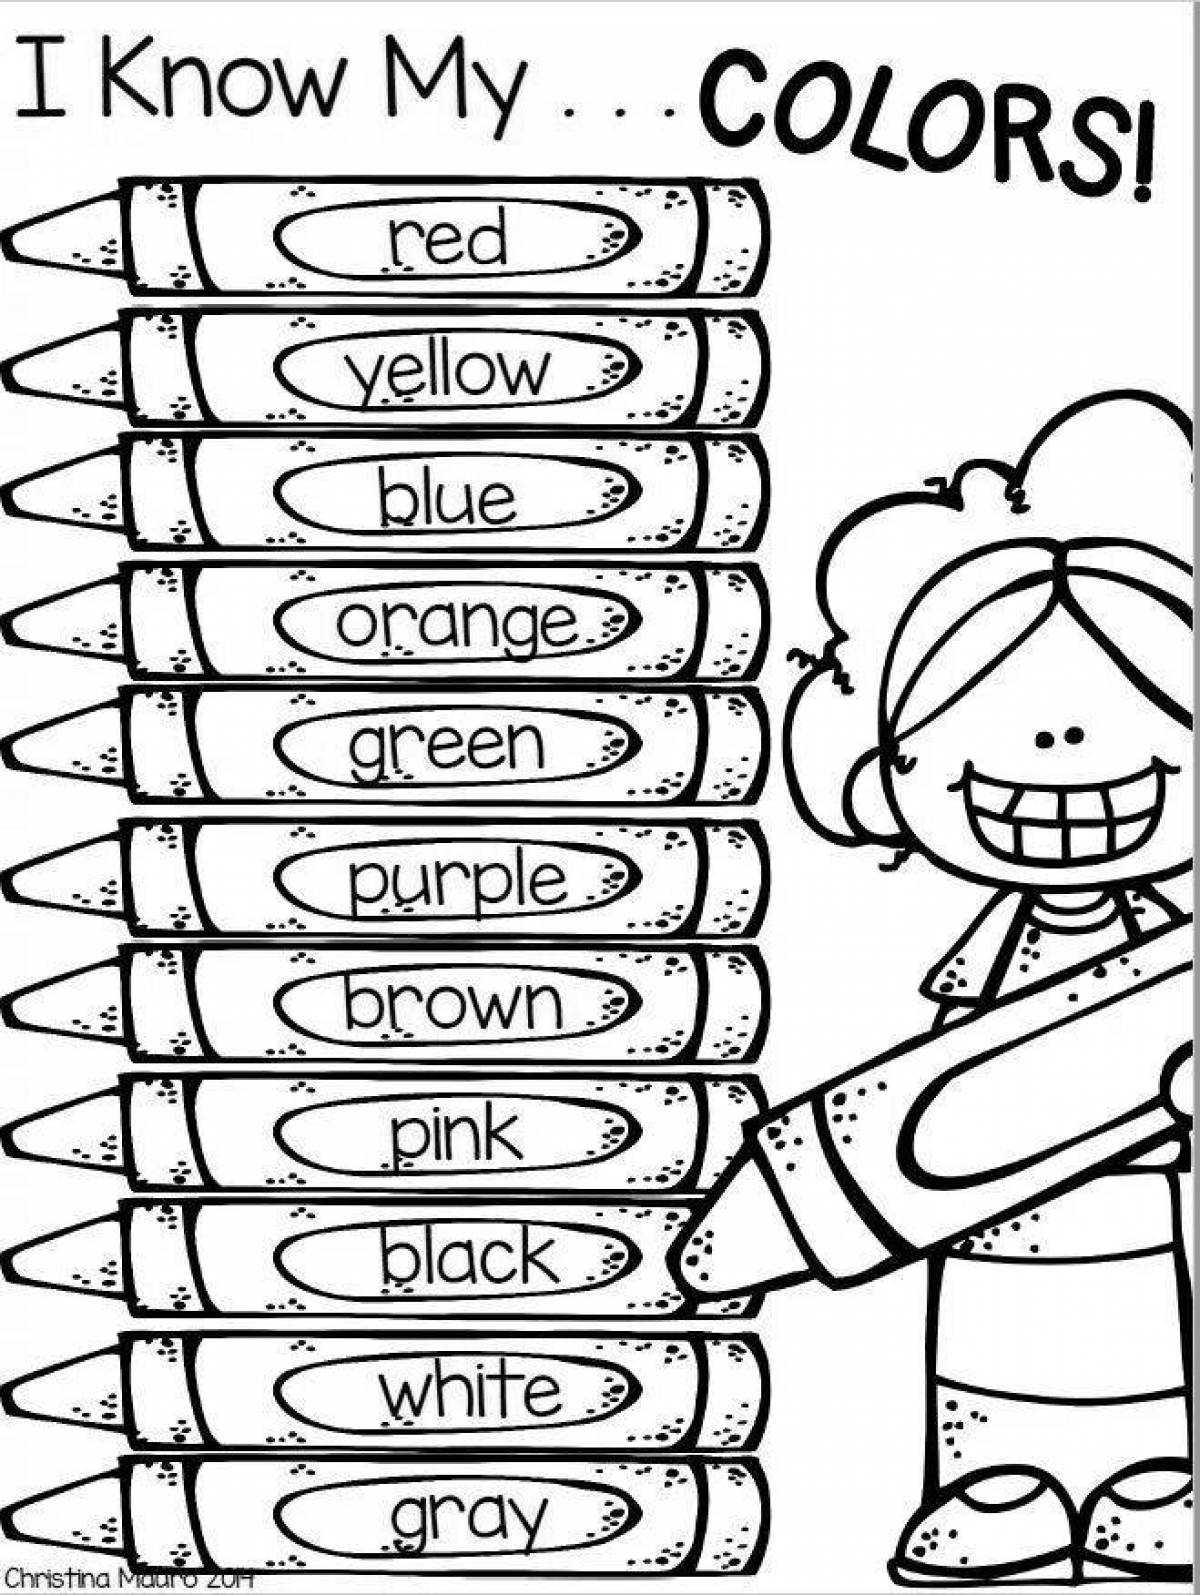 Charming coloring hey color